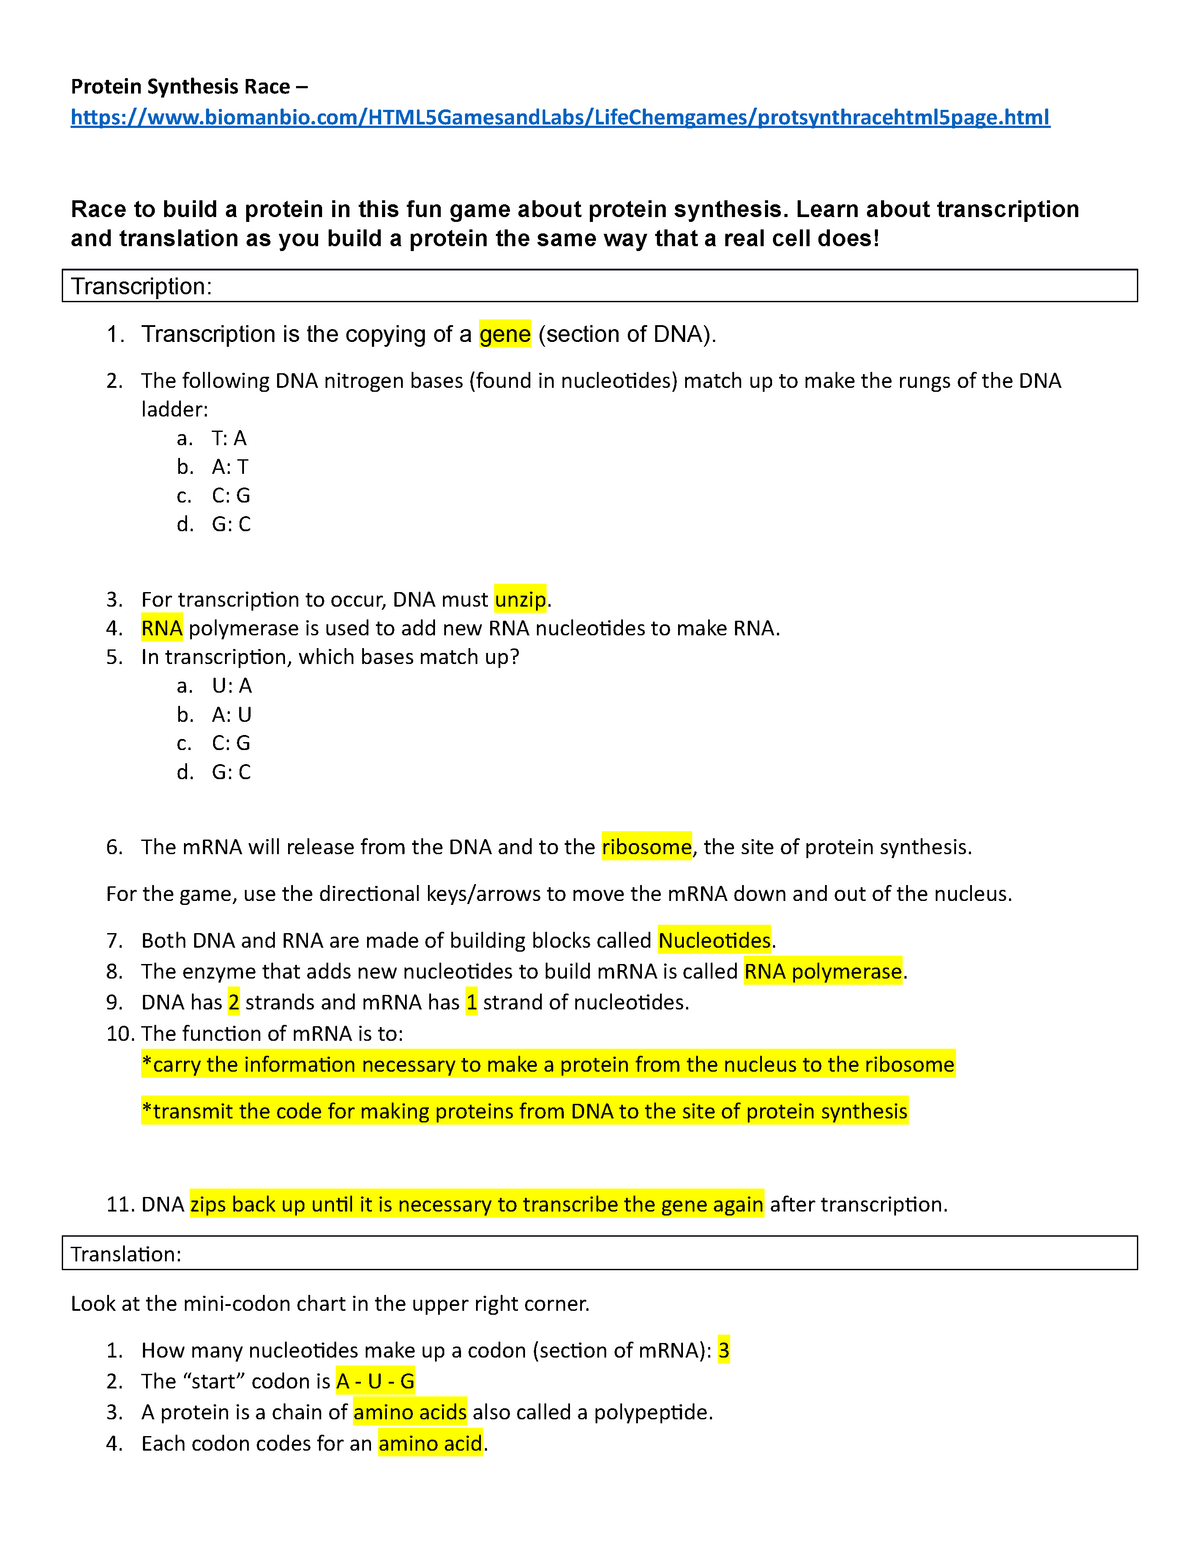 Protein Synthesis Race worksheet Stensgaard - Protein Synthesis With Protein Synthesis Review Worksheet Answers